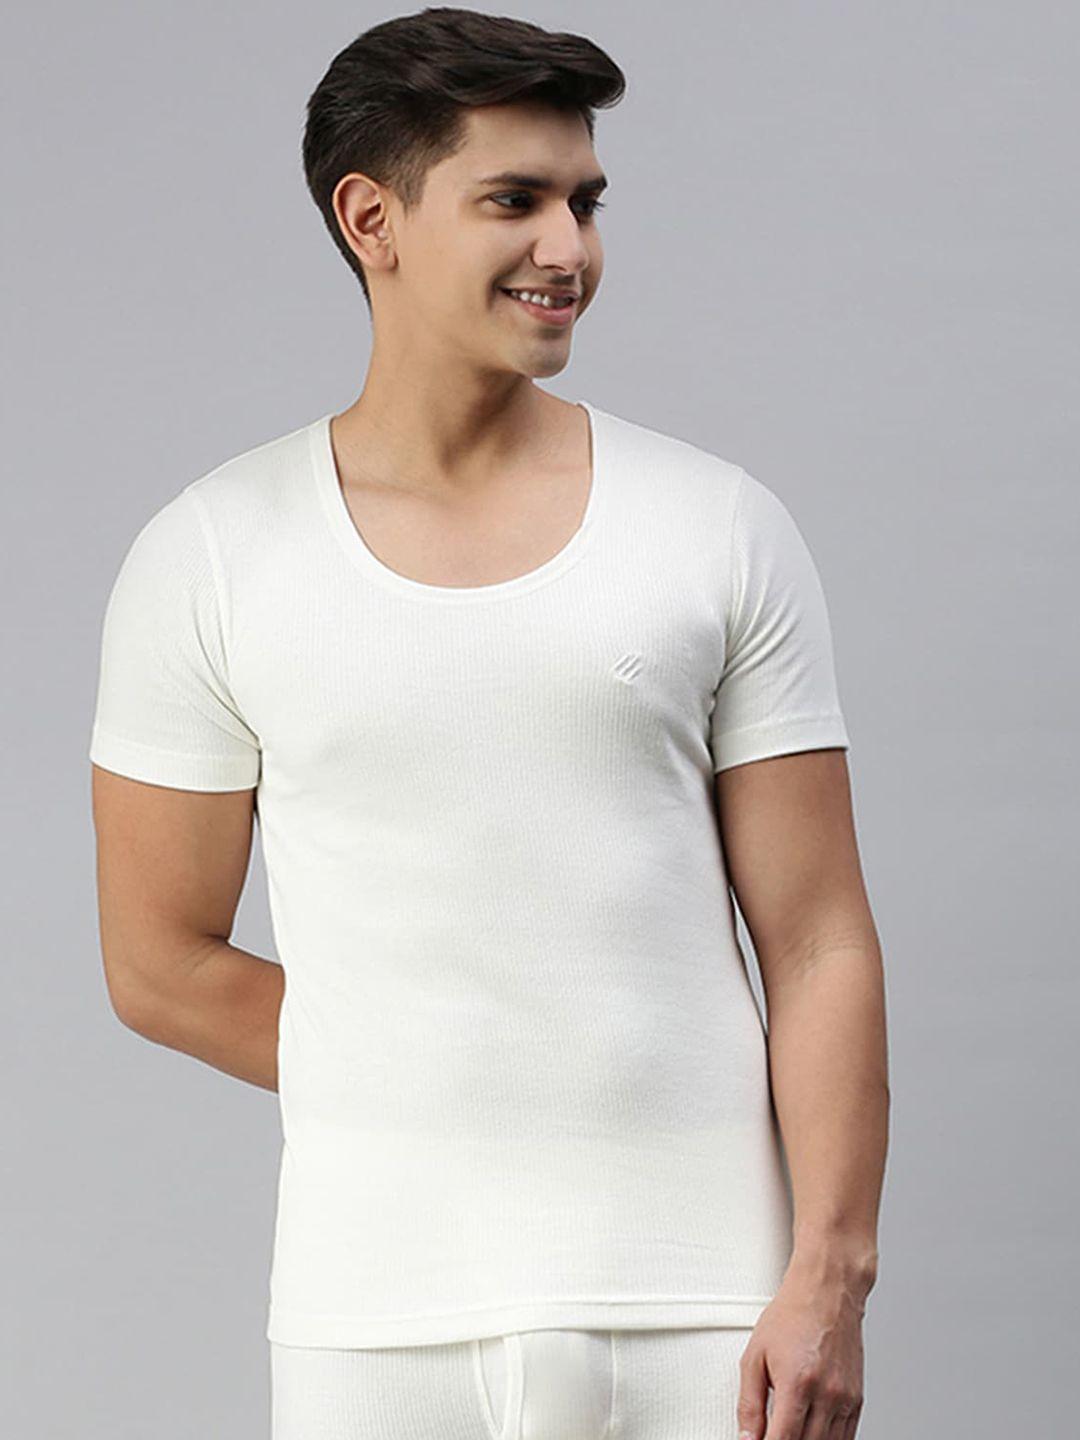 onn-cotton-slim-fit-thermal-top